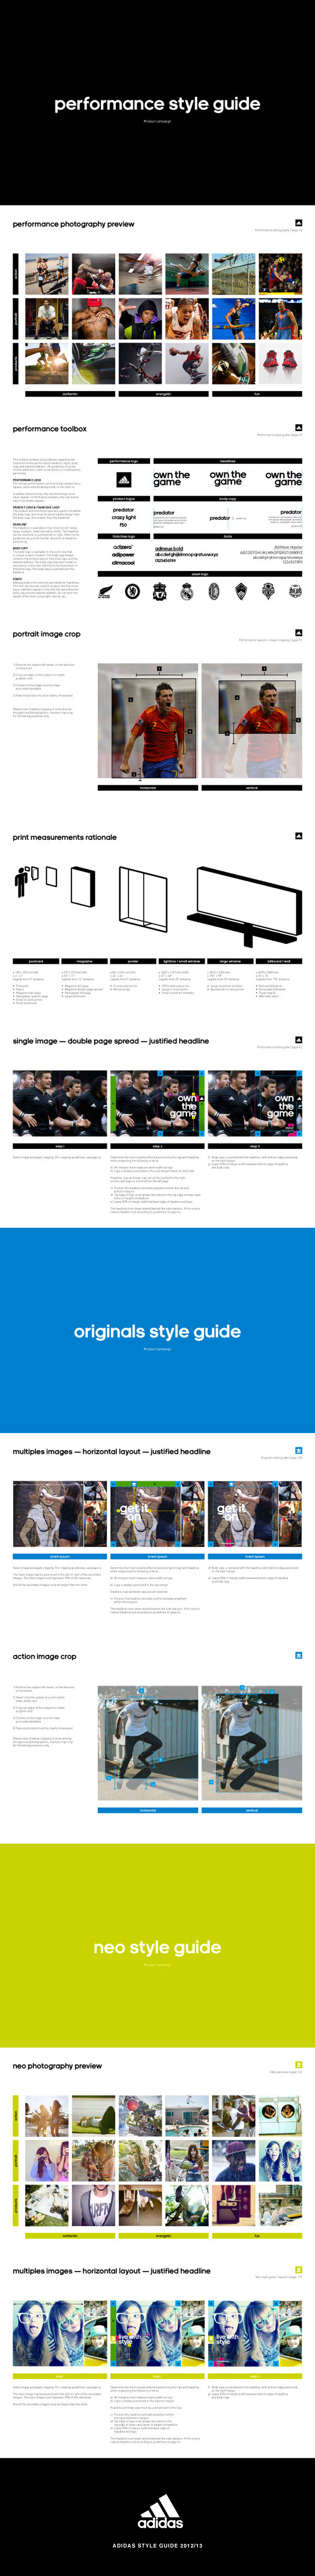 adidas brand assets Performance Original Style Guide Layout